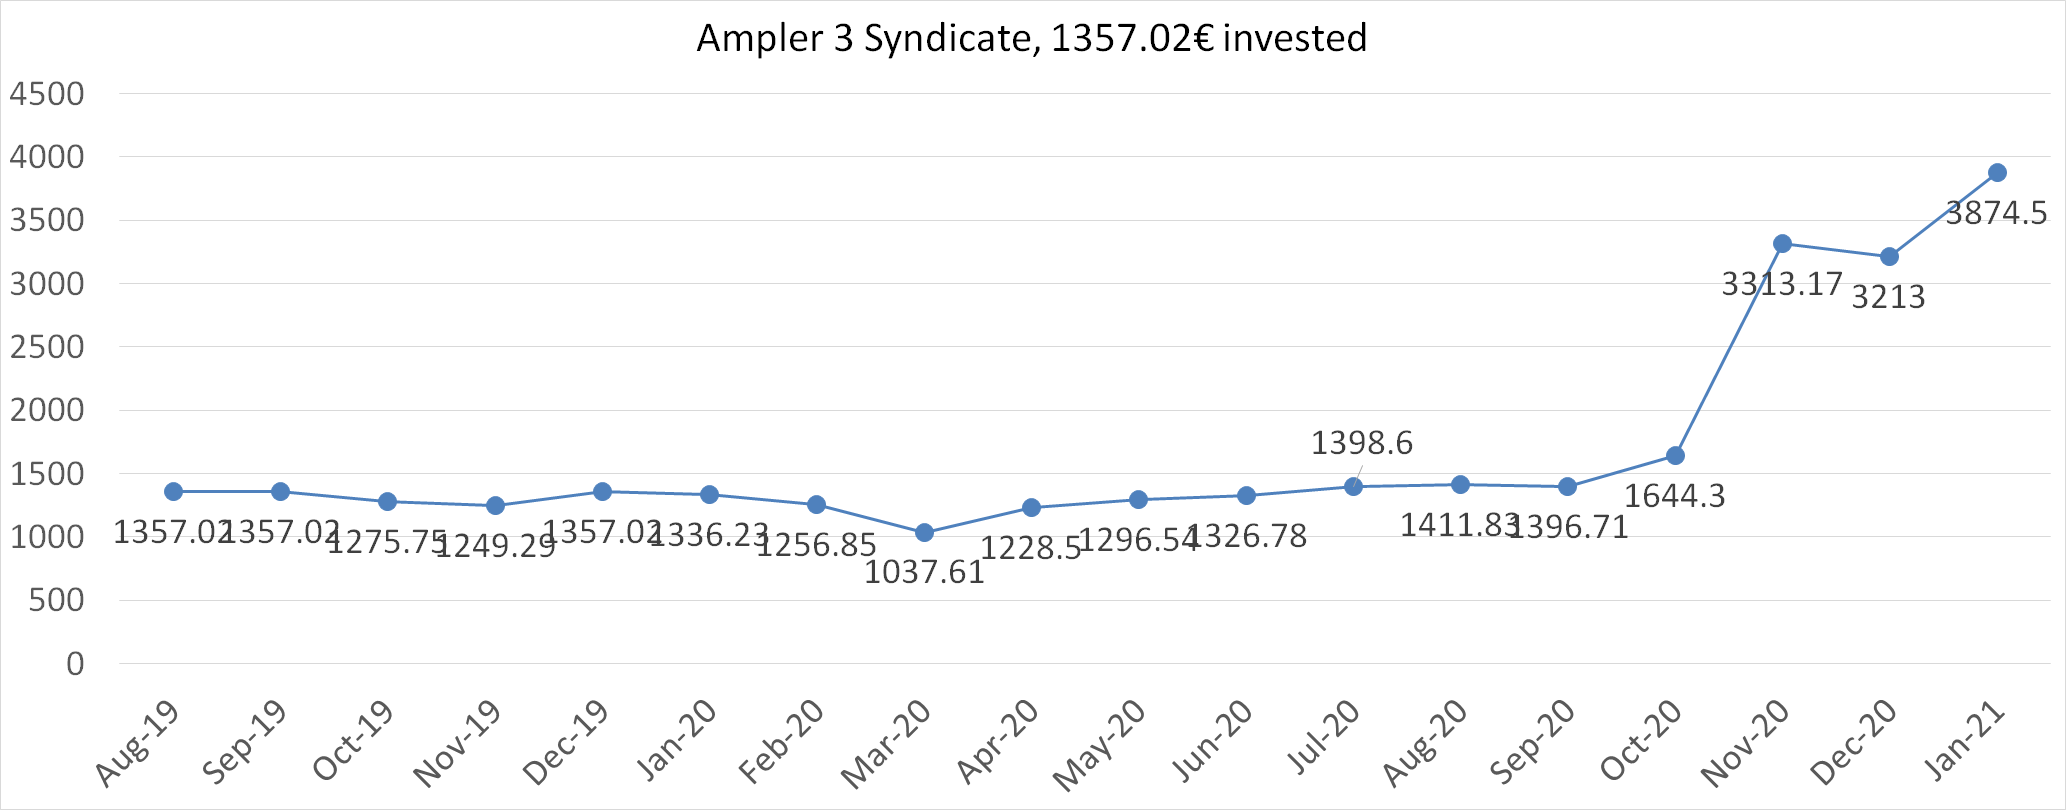 Ampler 3 syndicate worth january 2021